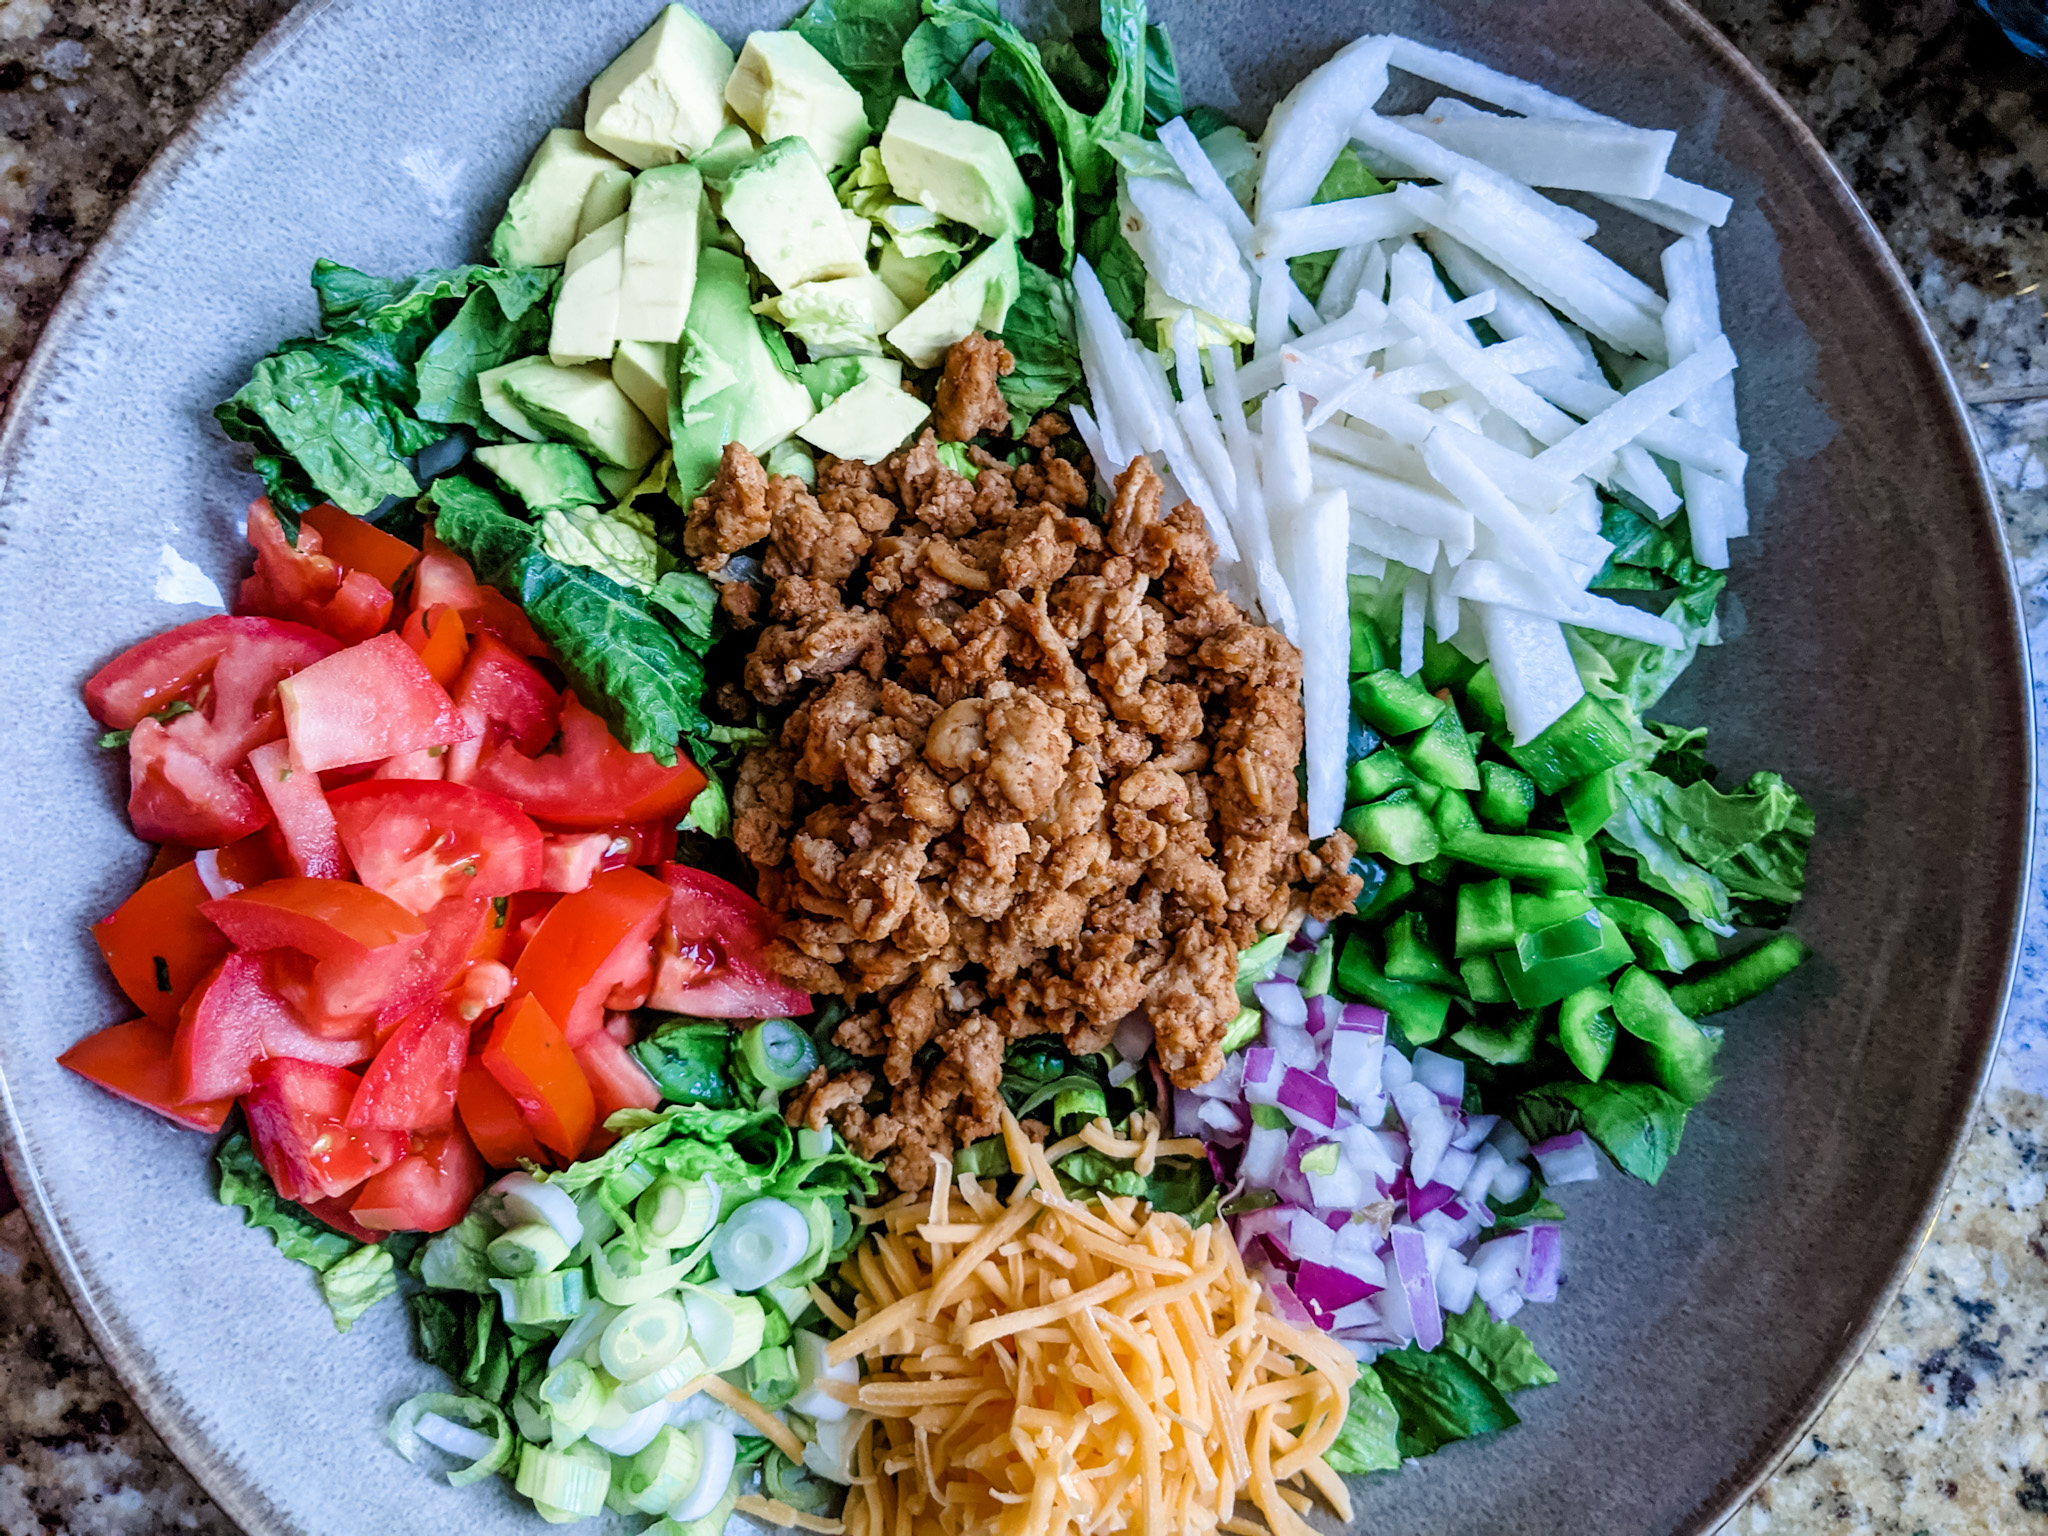 The Chicken Taco Salad, not mixed, in a stone bowl